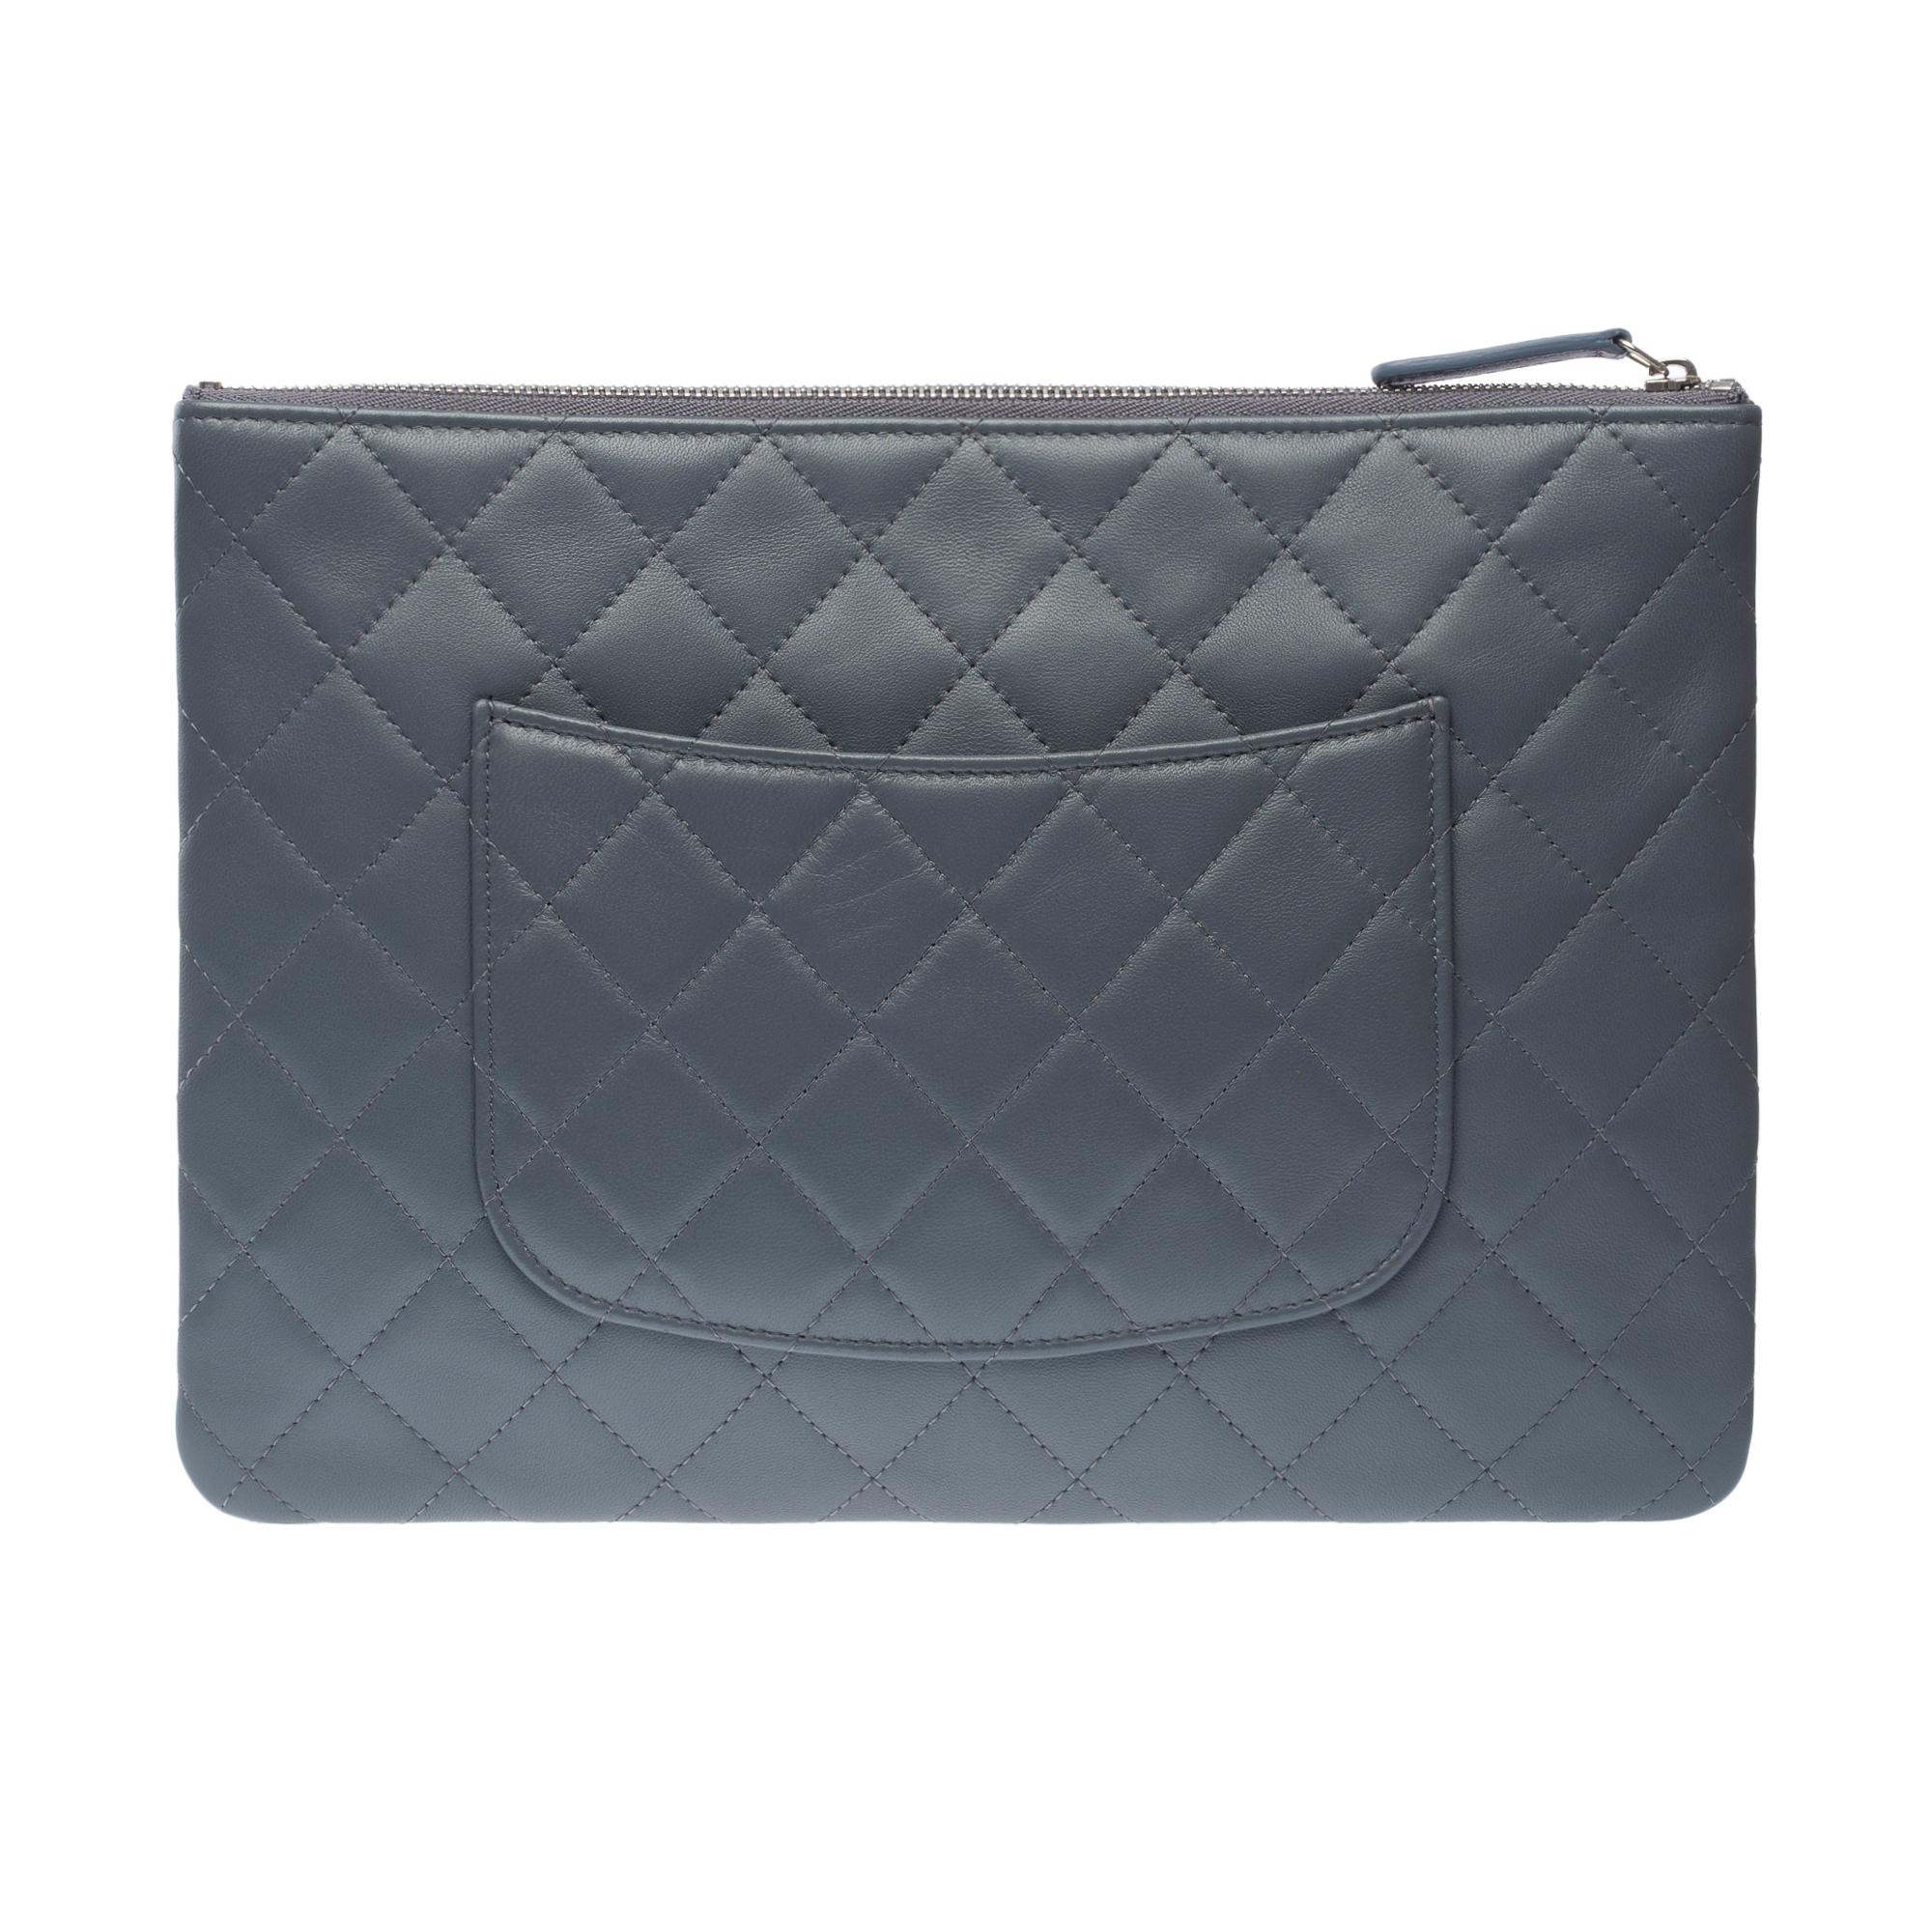 Women's Limited Edition Chanel Pouch/Clutch in multicolor quilted leather, SHW For Sale